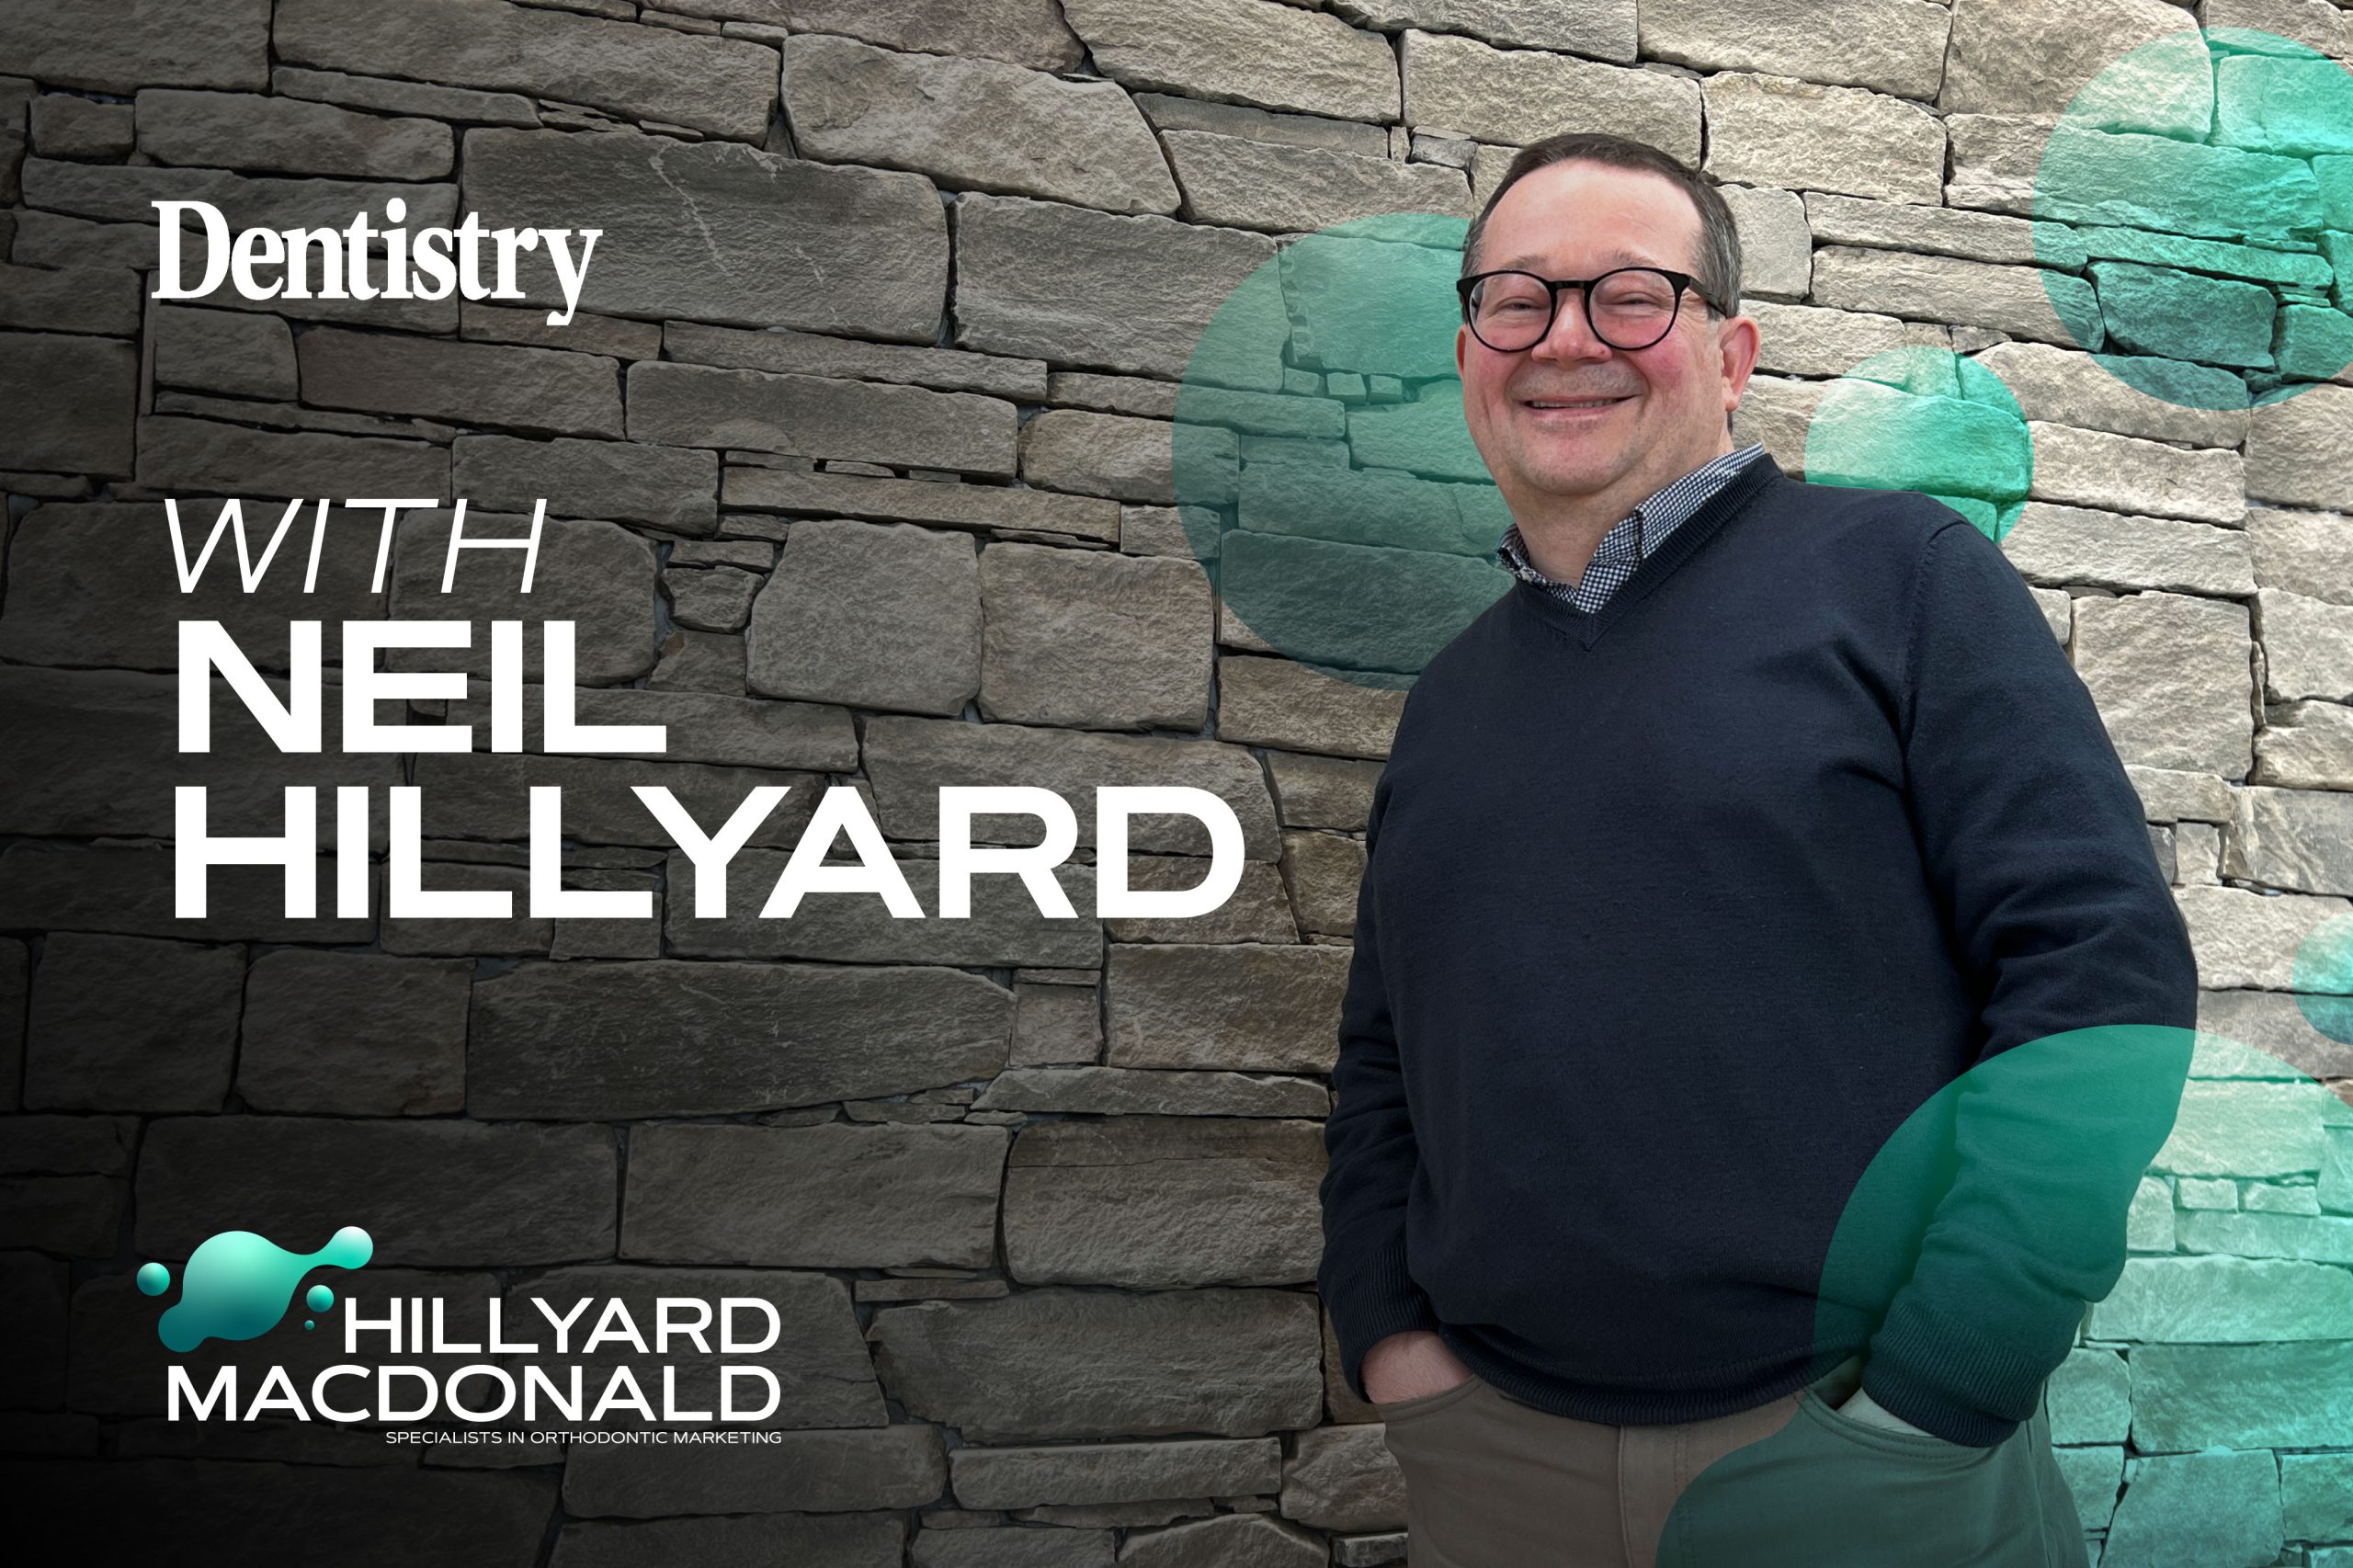 Neil Hillyard discusses why embracing marketing is essential for practice growth, building your brand and standing out from the crowd.